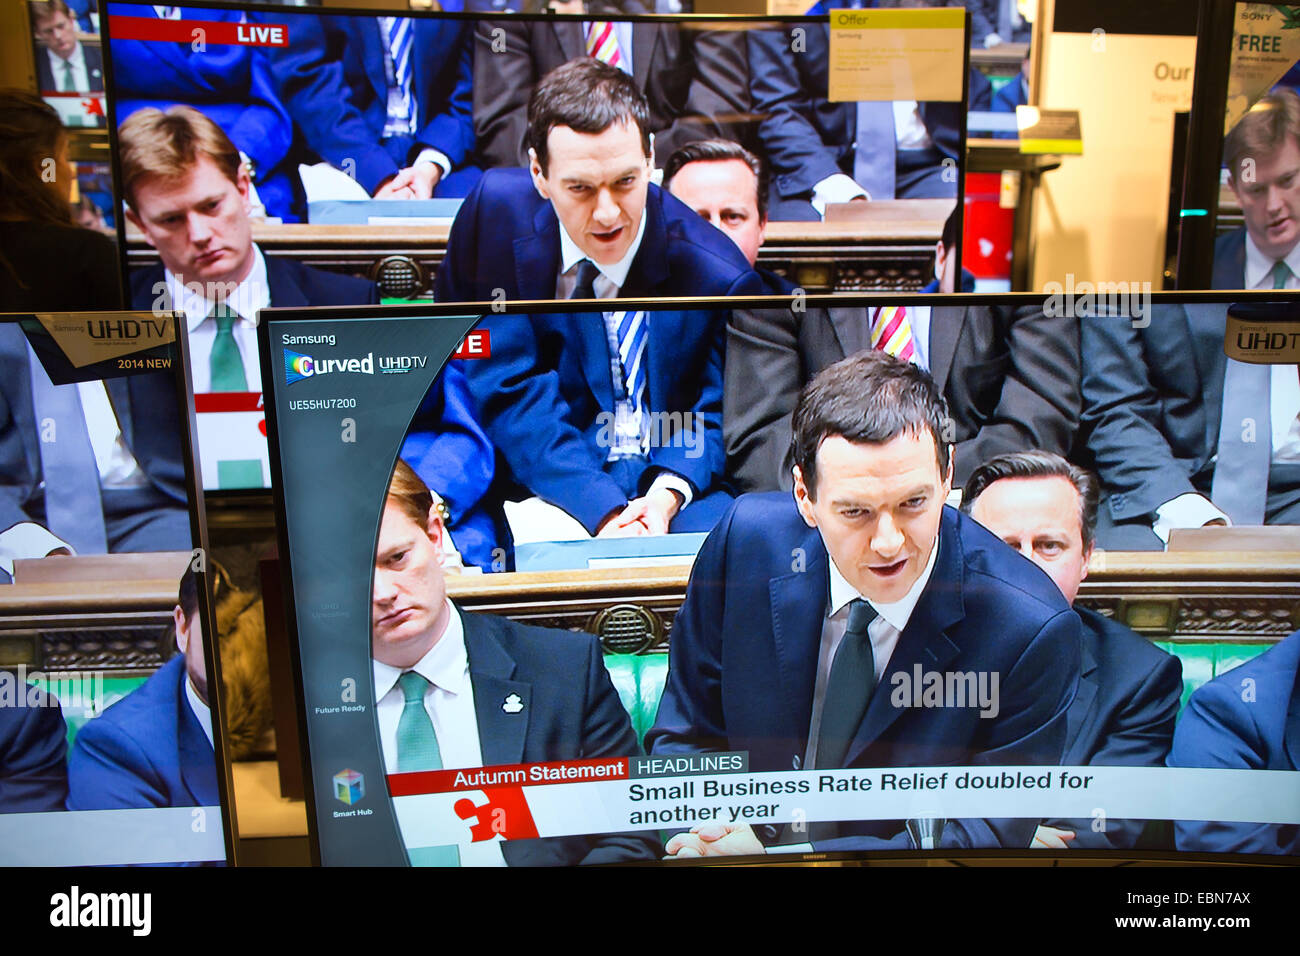 Autumn Statement 3rd December 2014, London, UK Picture shows George Osborne, Chancellor of the Exchequer delivering his Autumn Statement to the House of Commons shown on multiple televisions in a central London department store. Stock Photo